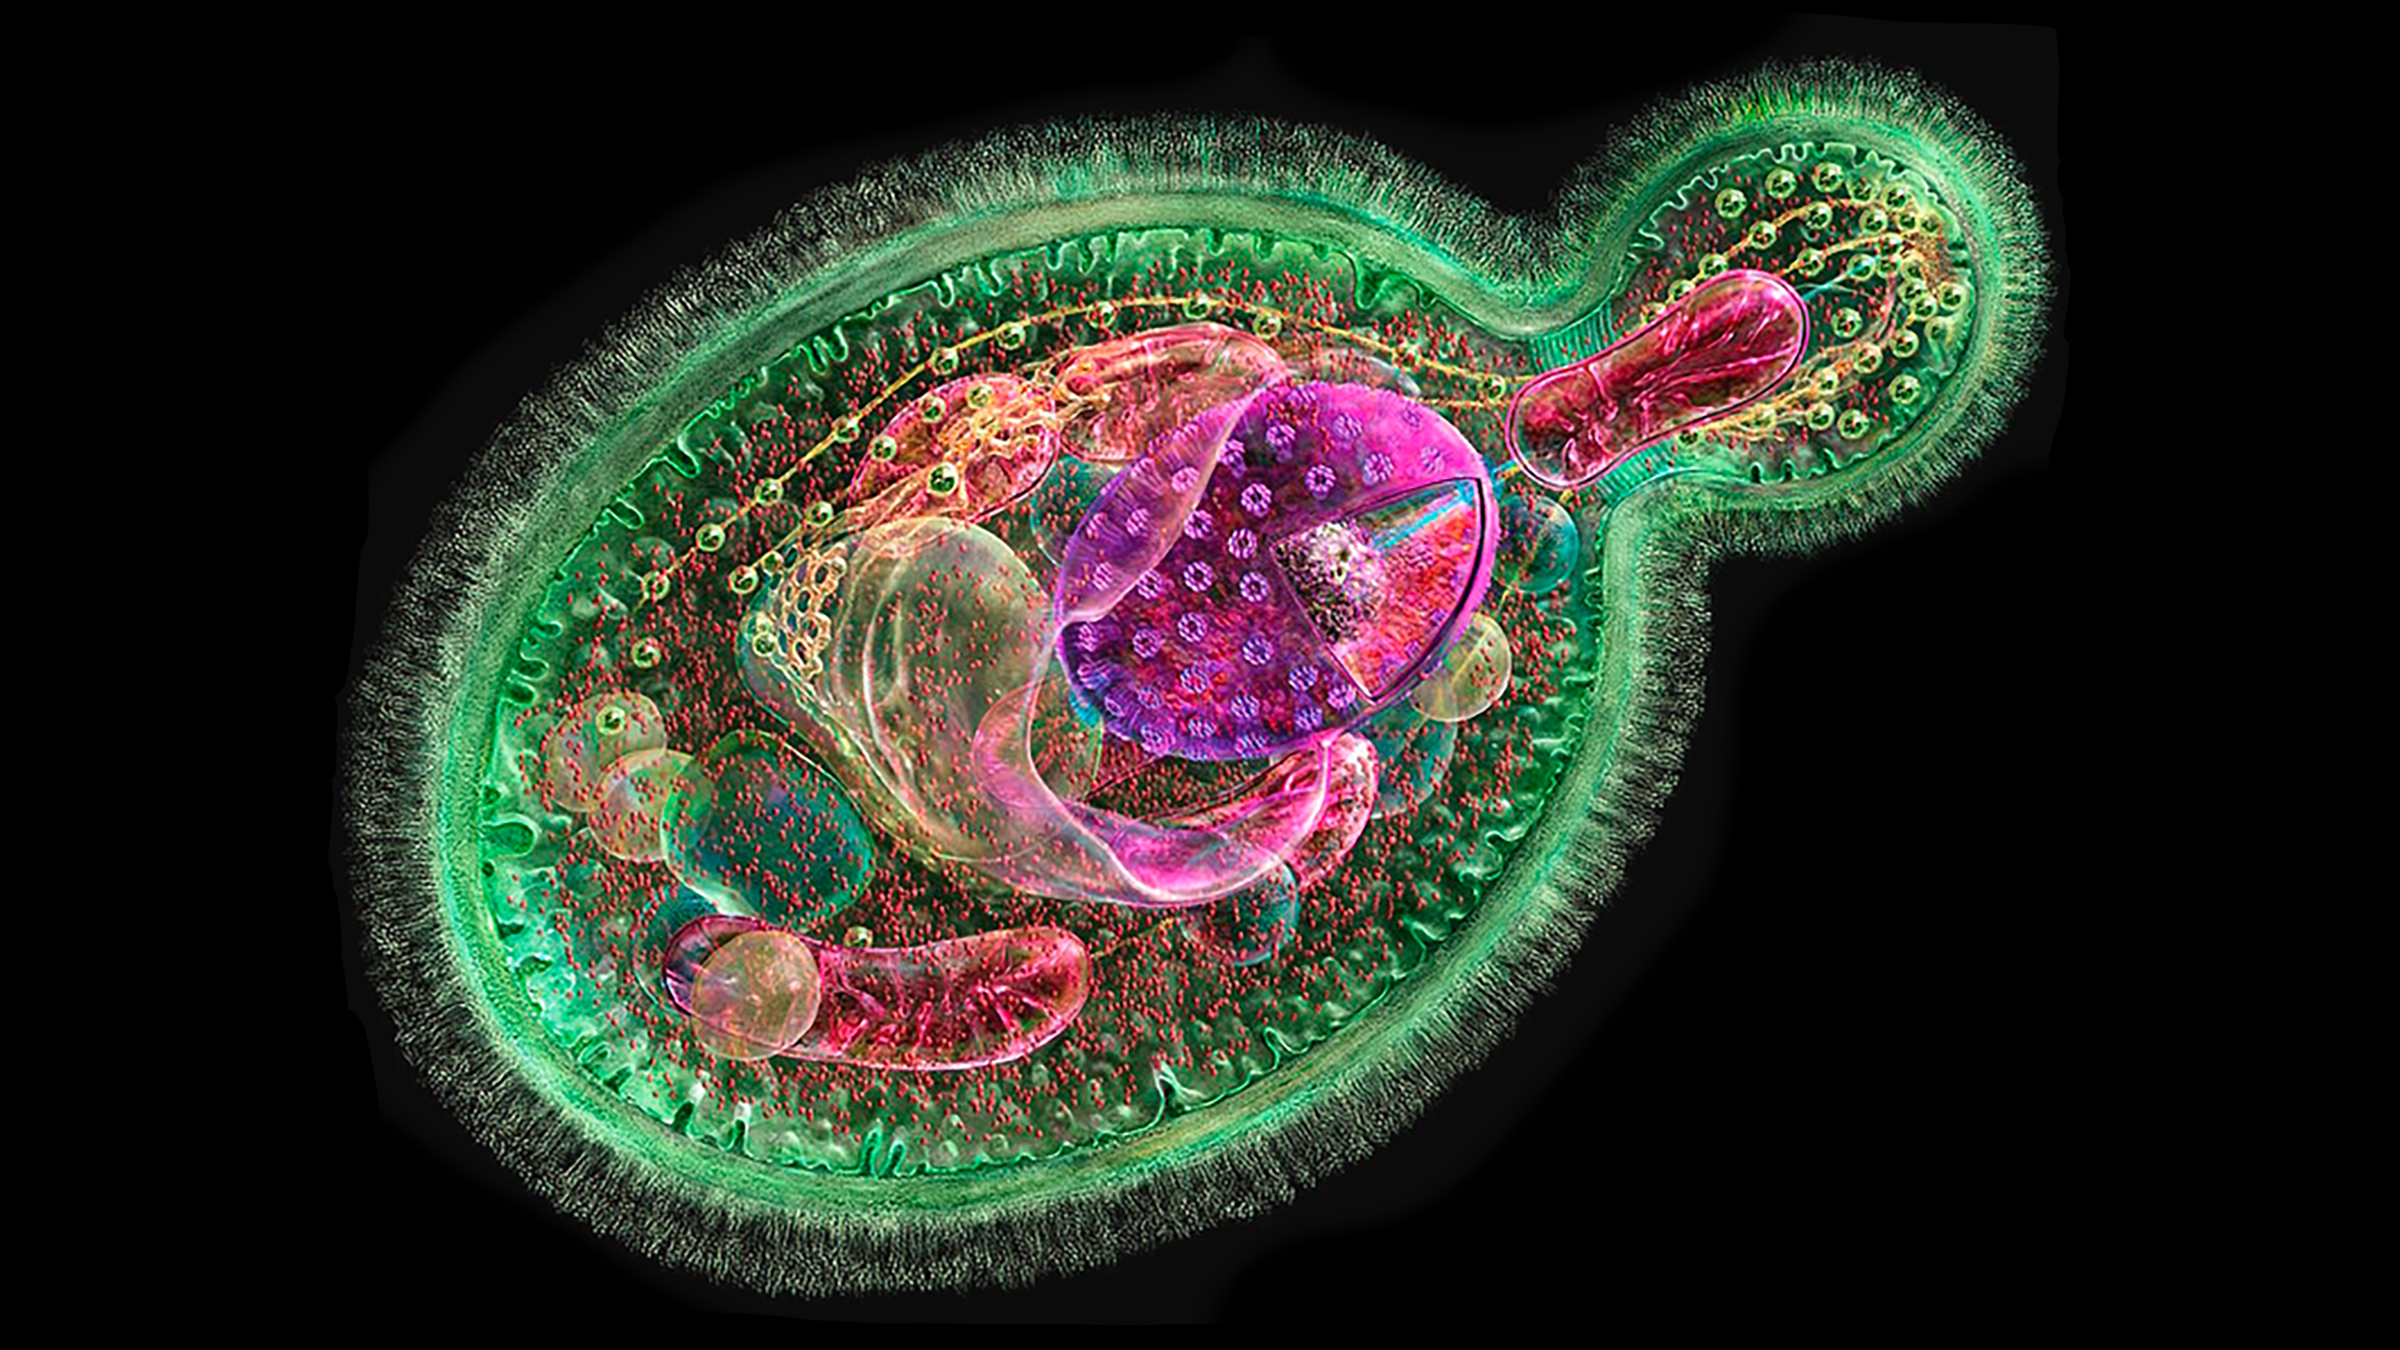 A microscope image of the internal features of a yeast cell